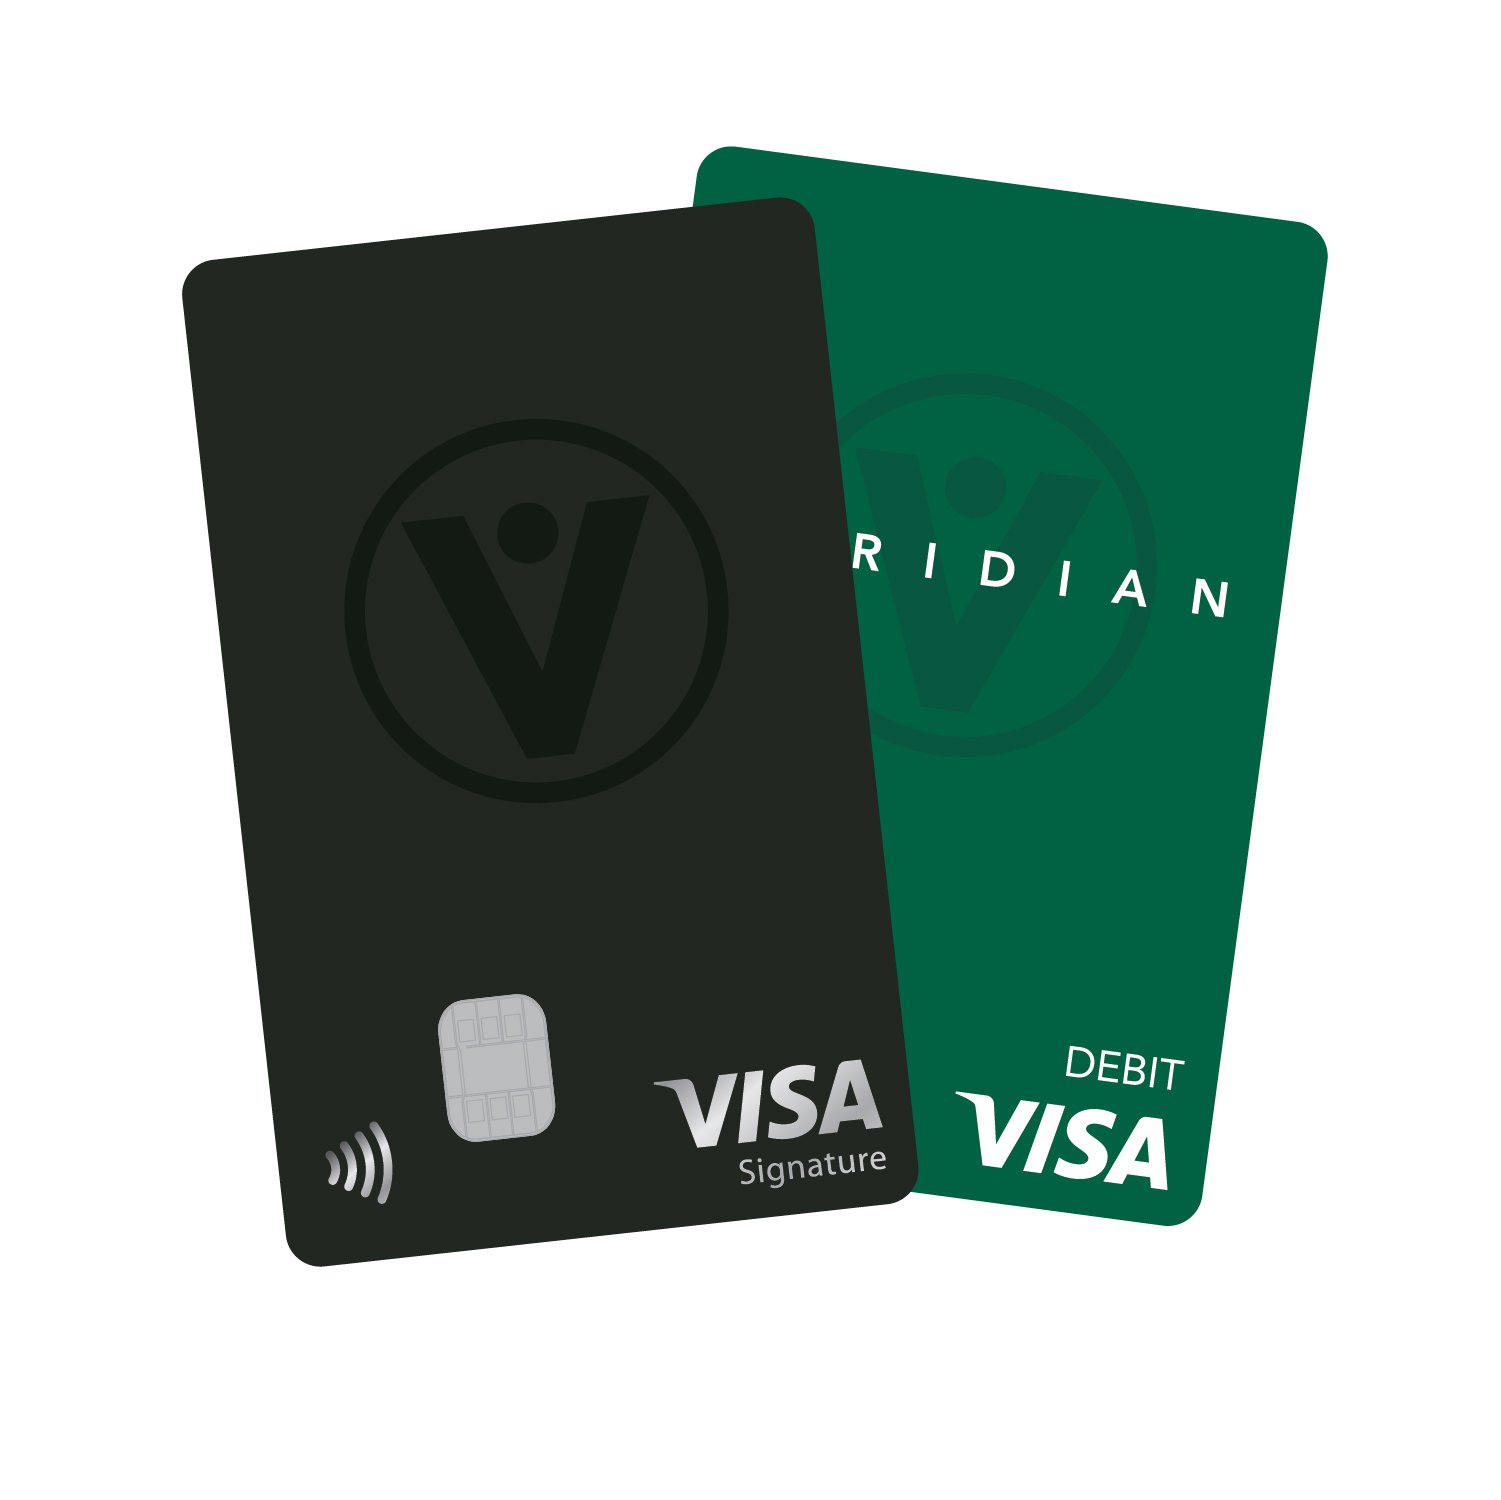 Veridian Credit Union upgrades to contactless debit and credit cards - CUInsight